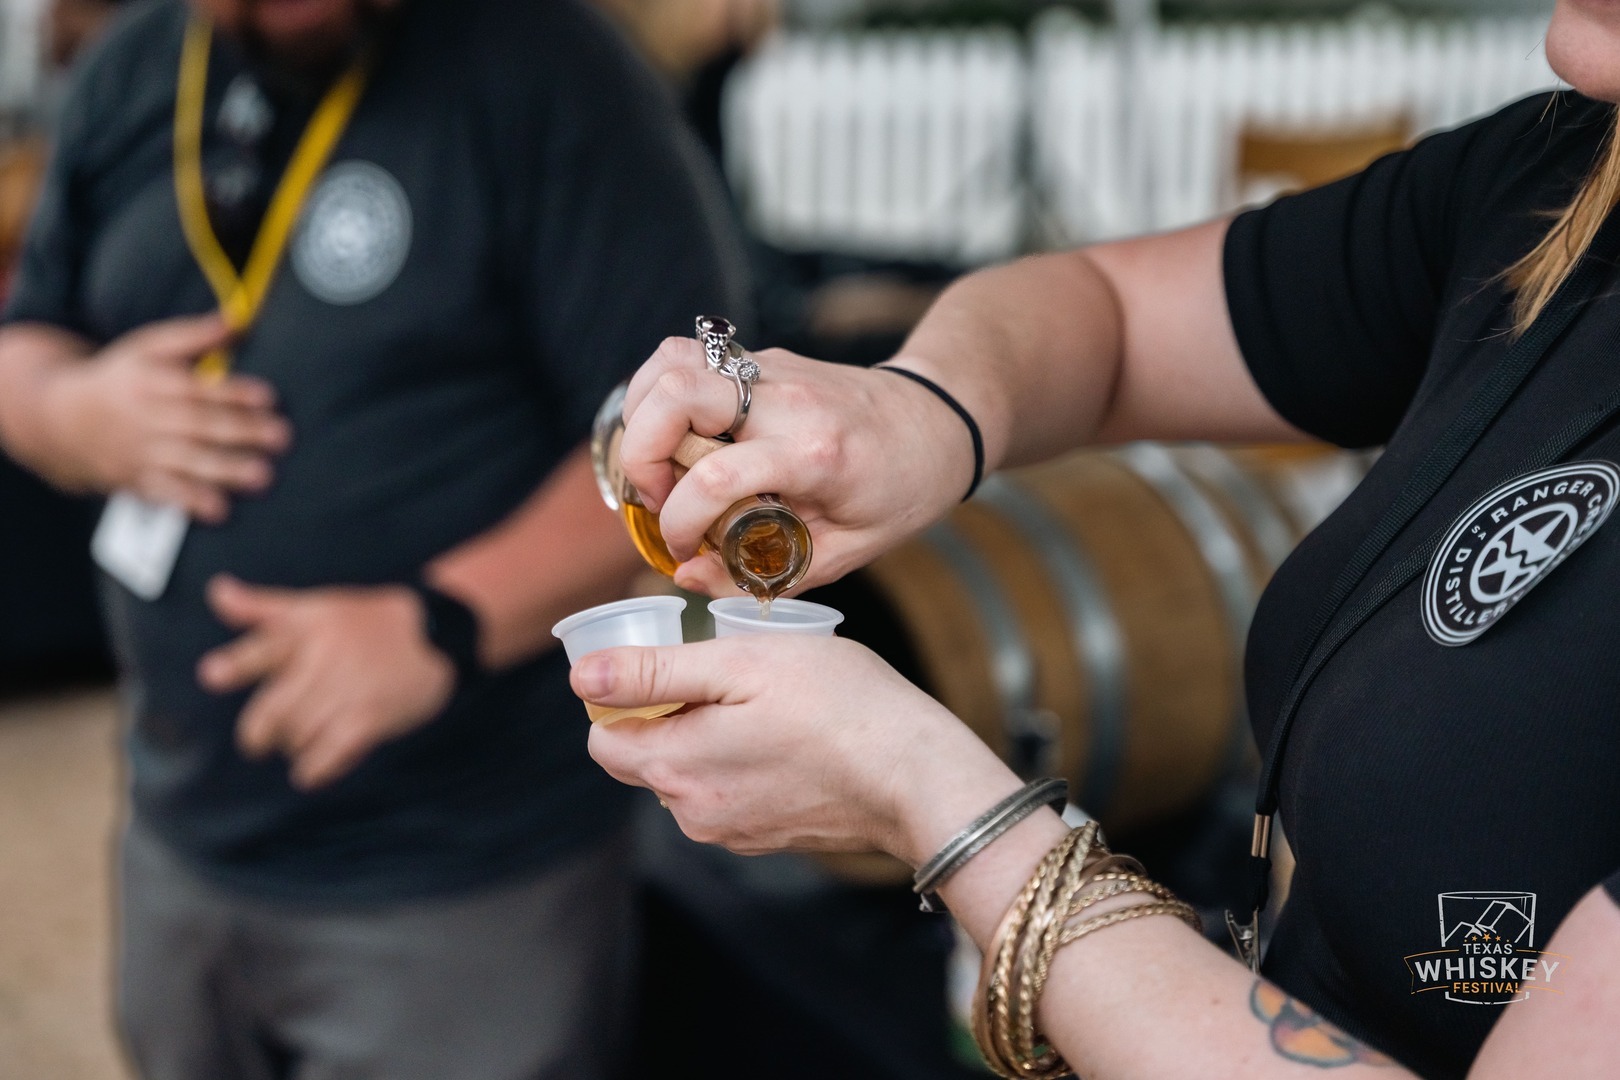 7th Annual Texas Whiskey Festival, Bee Cave, Texas, United States